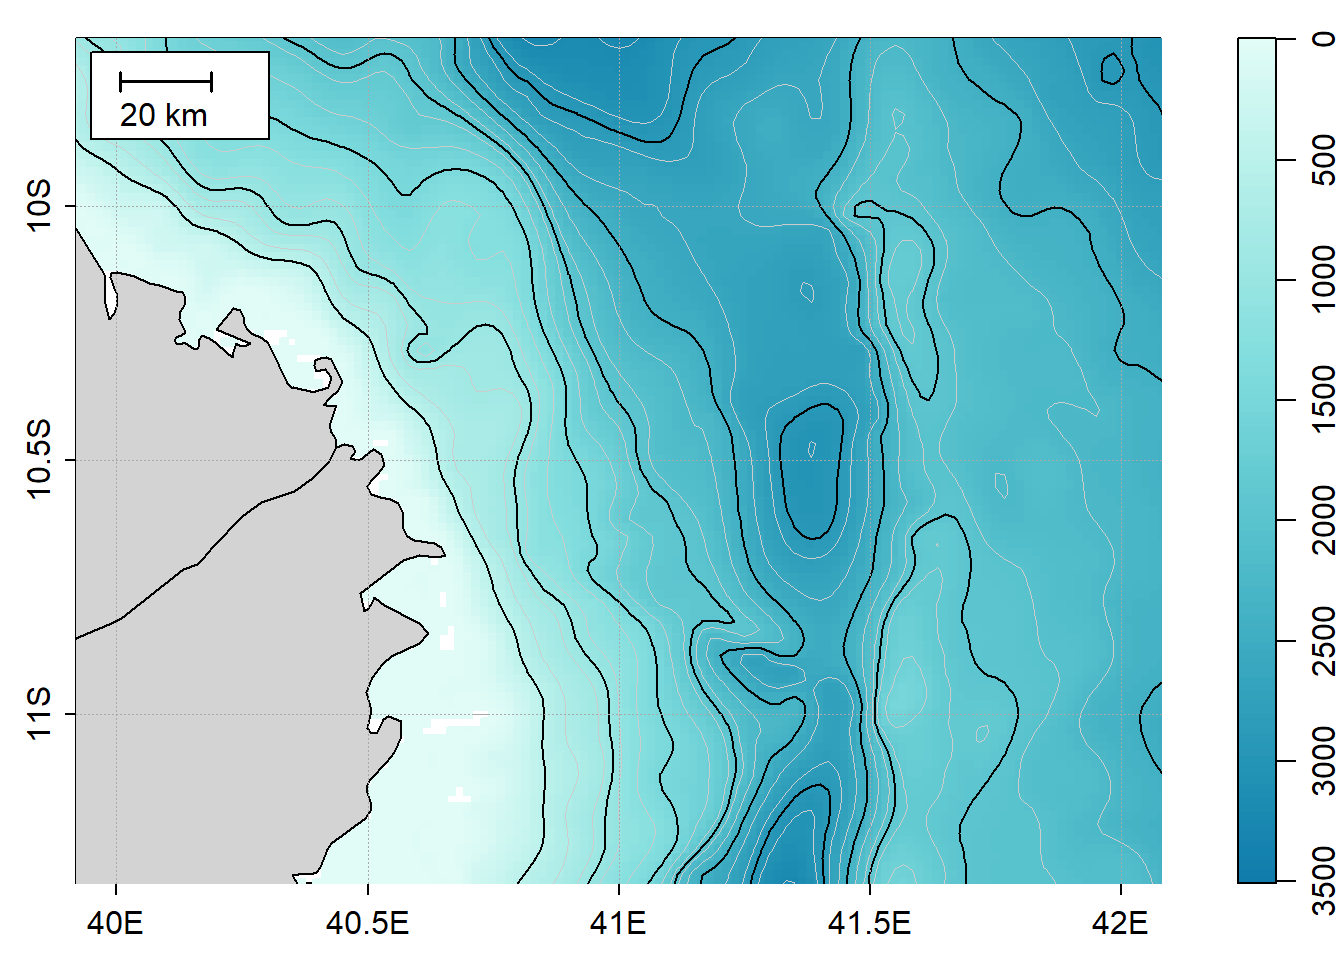 Bathymetry off Mtwara. the black line are contour at 500 m interval and the grey lines are contour at 200 m intervals